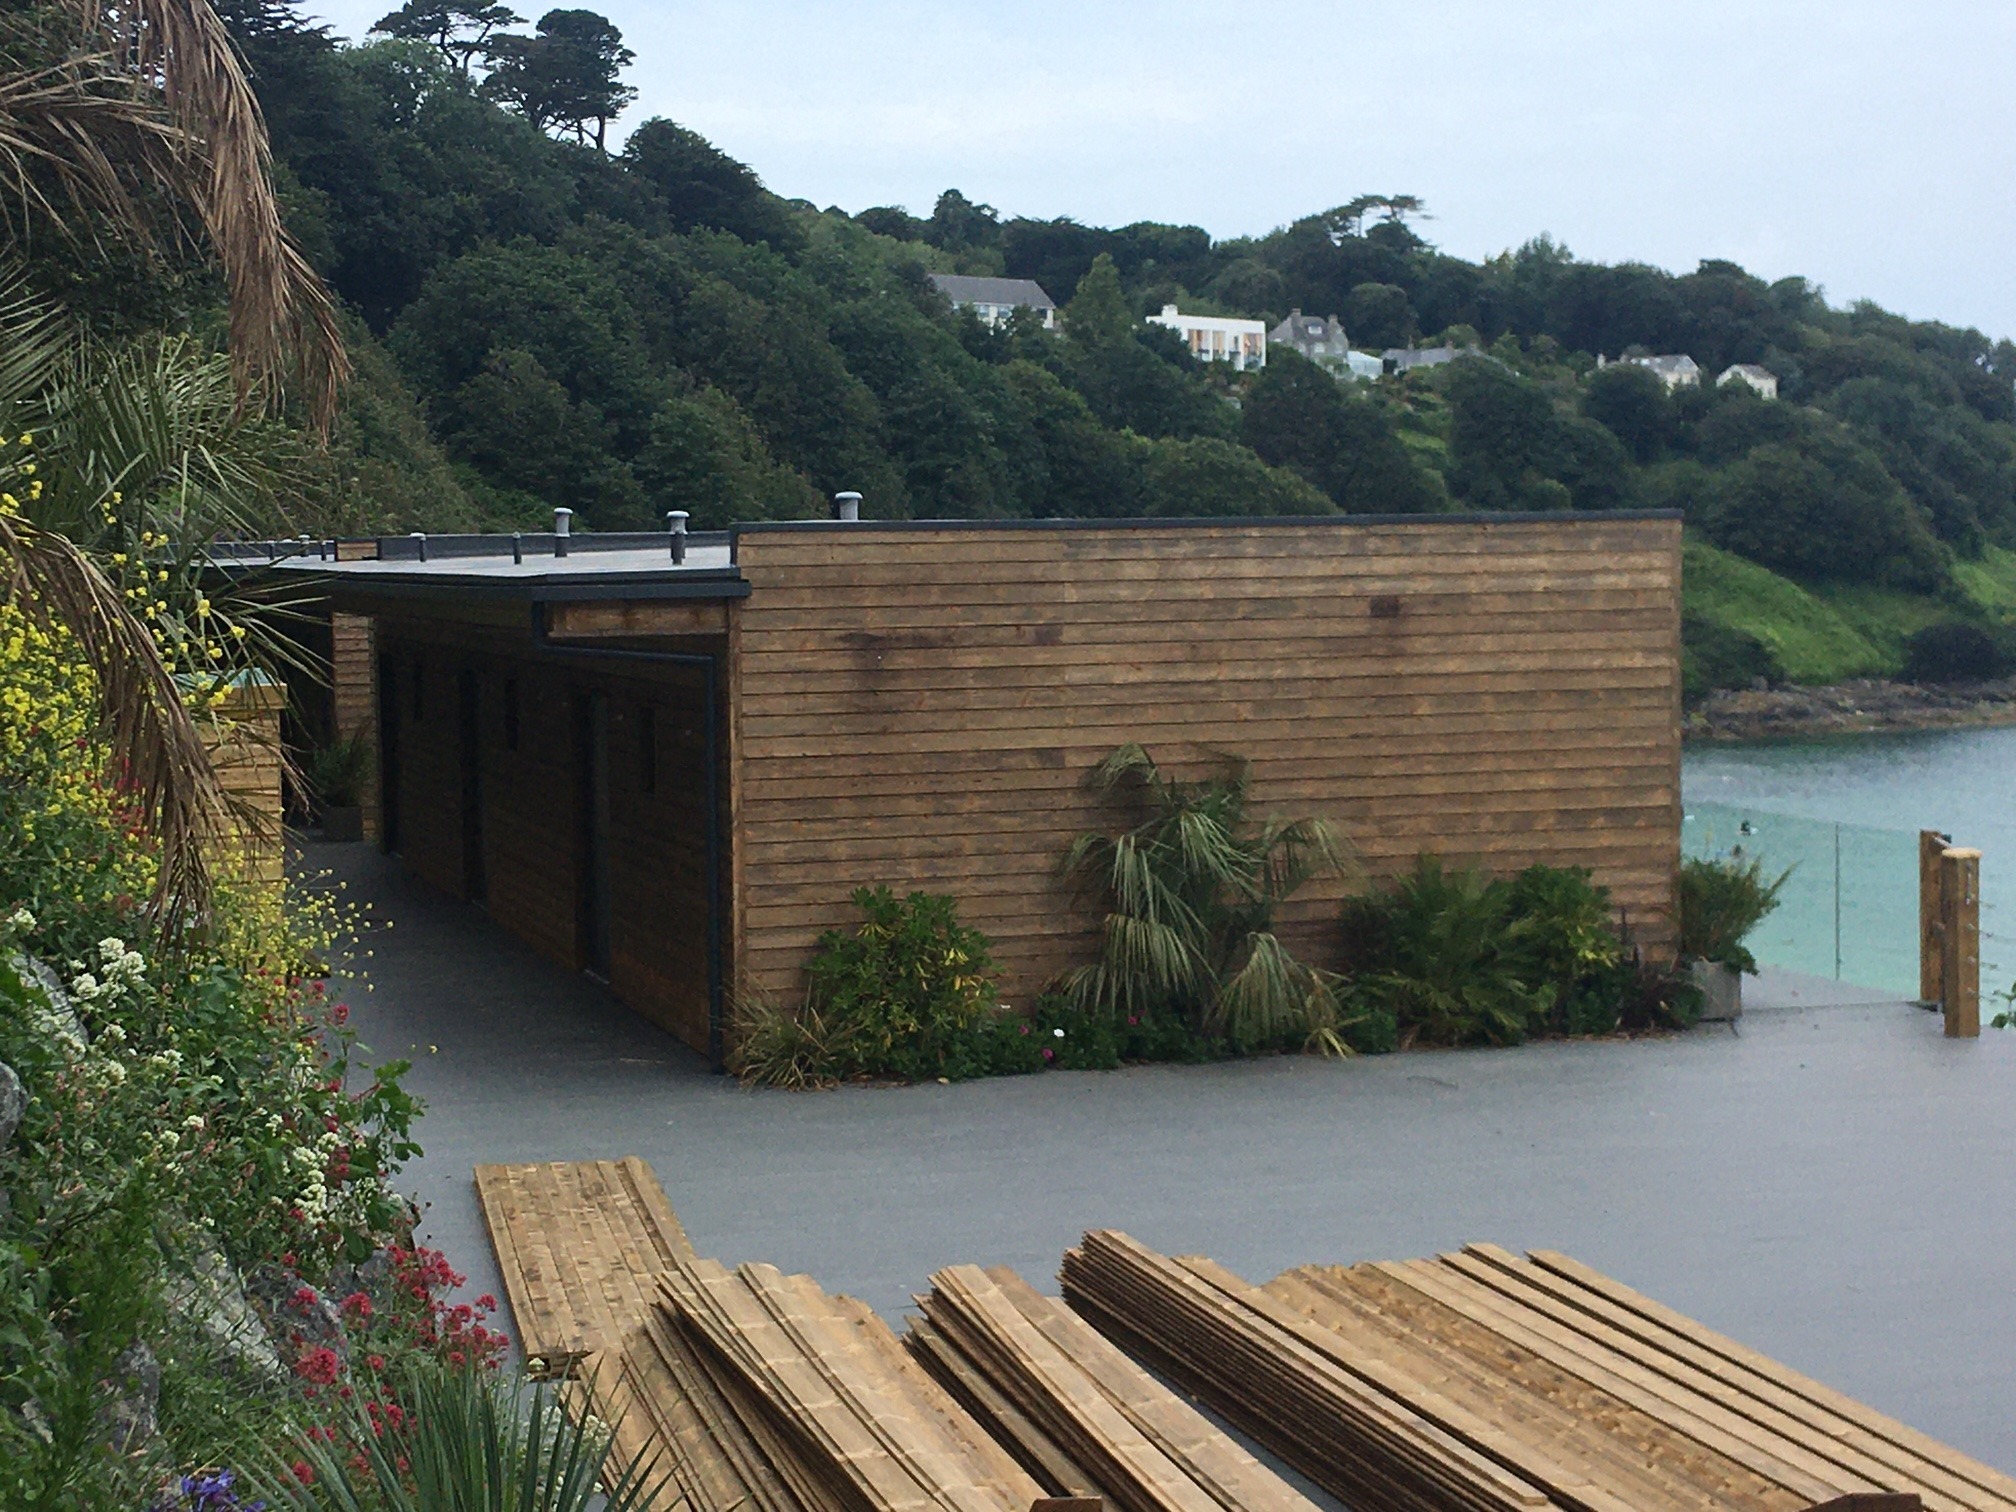 The newly constructed buildings at the Carbis Bay Hotel built without planning permission (Image provided by CPRE Cornwall, free to use, no credit required)